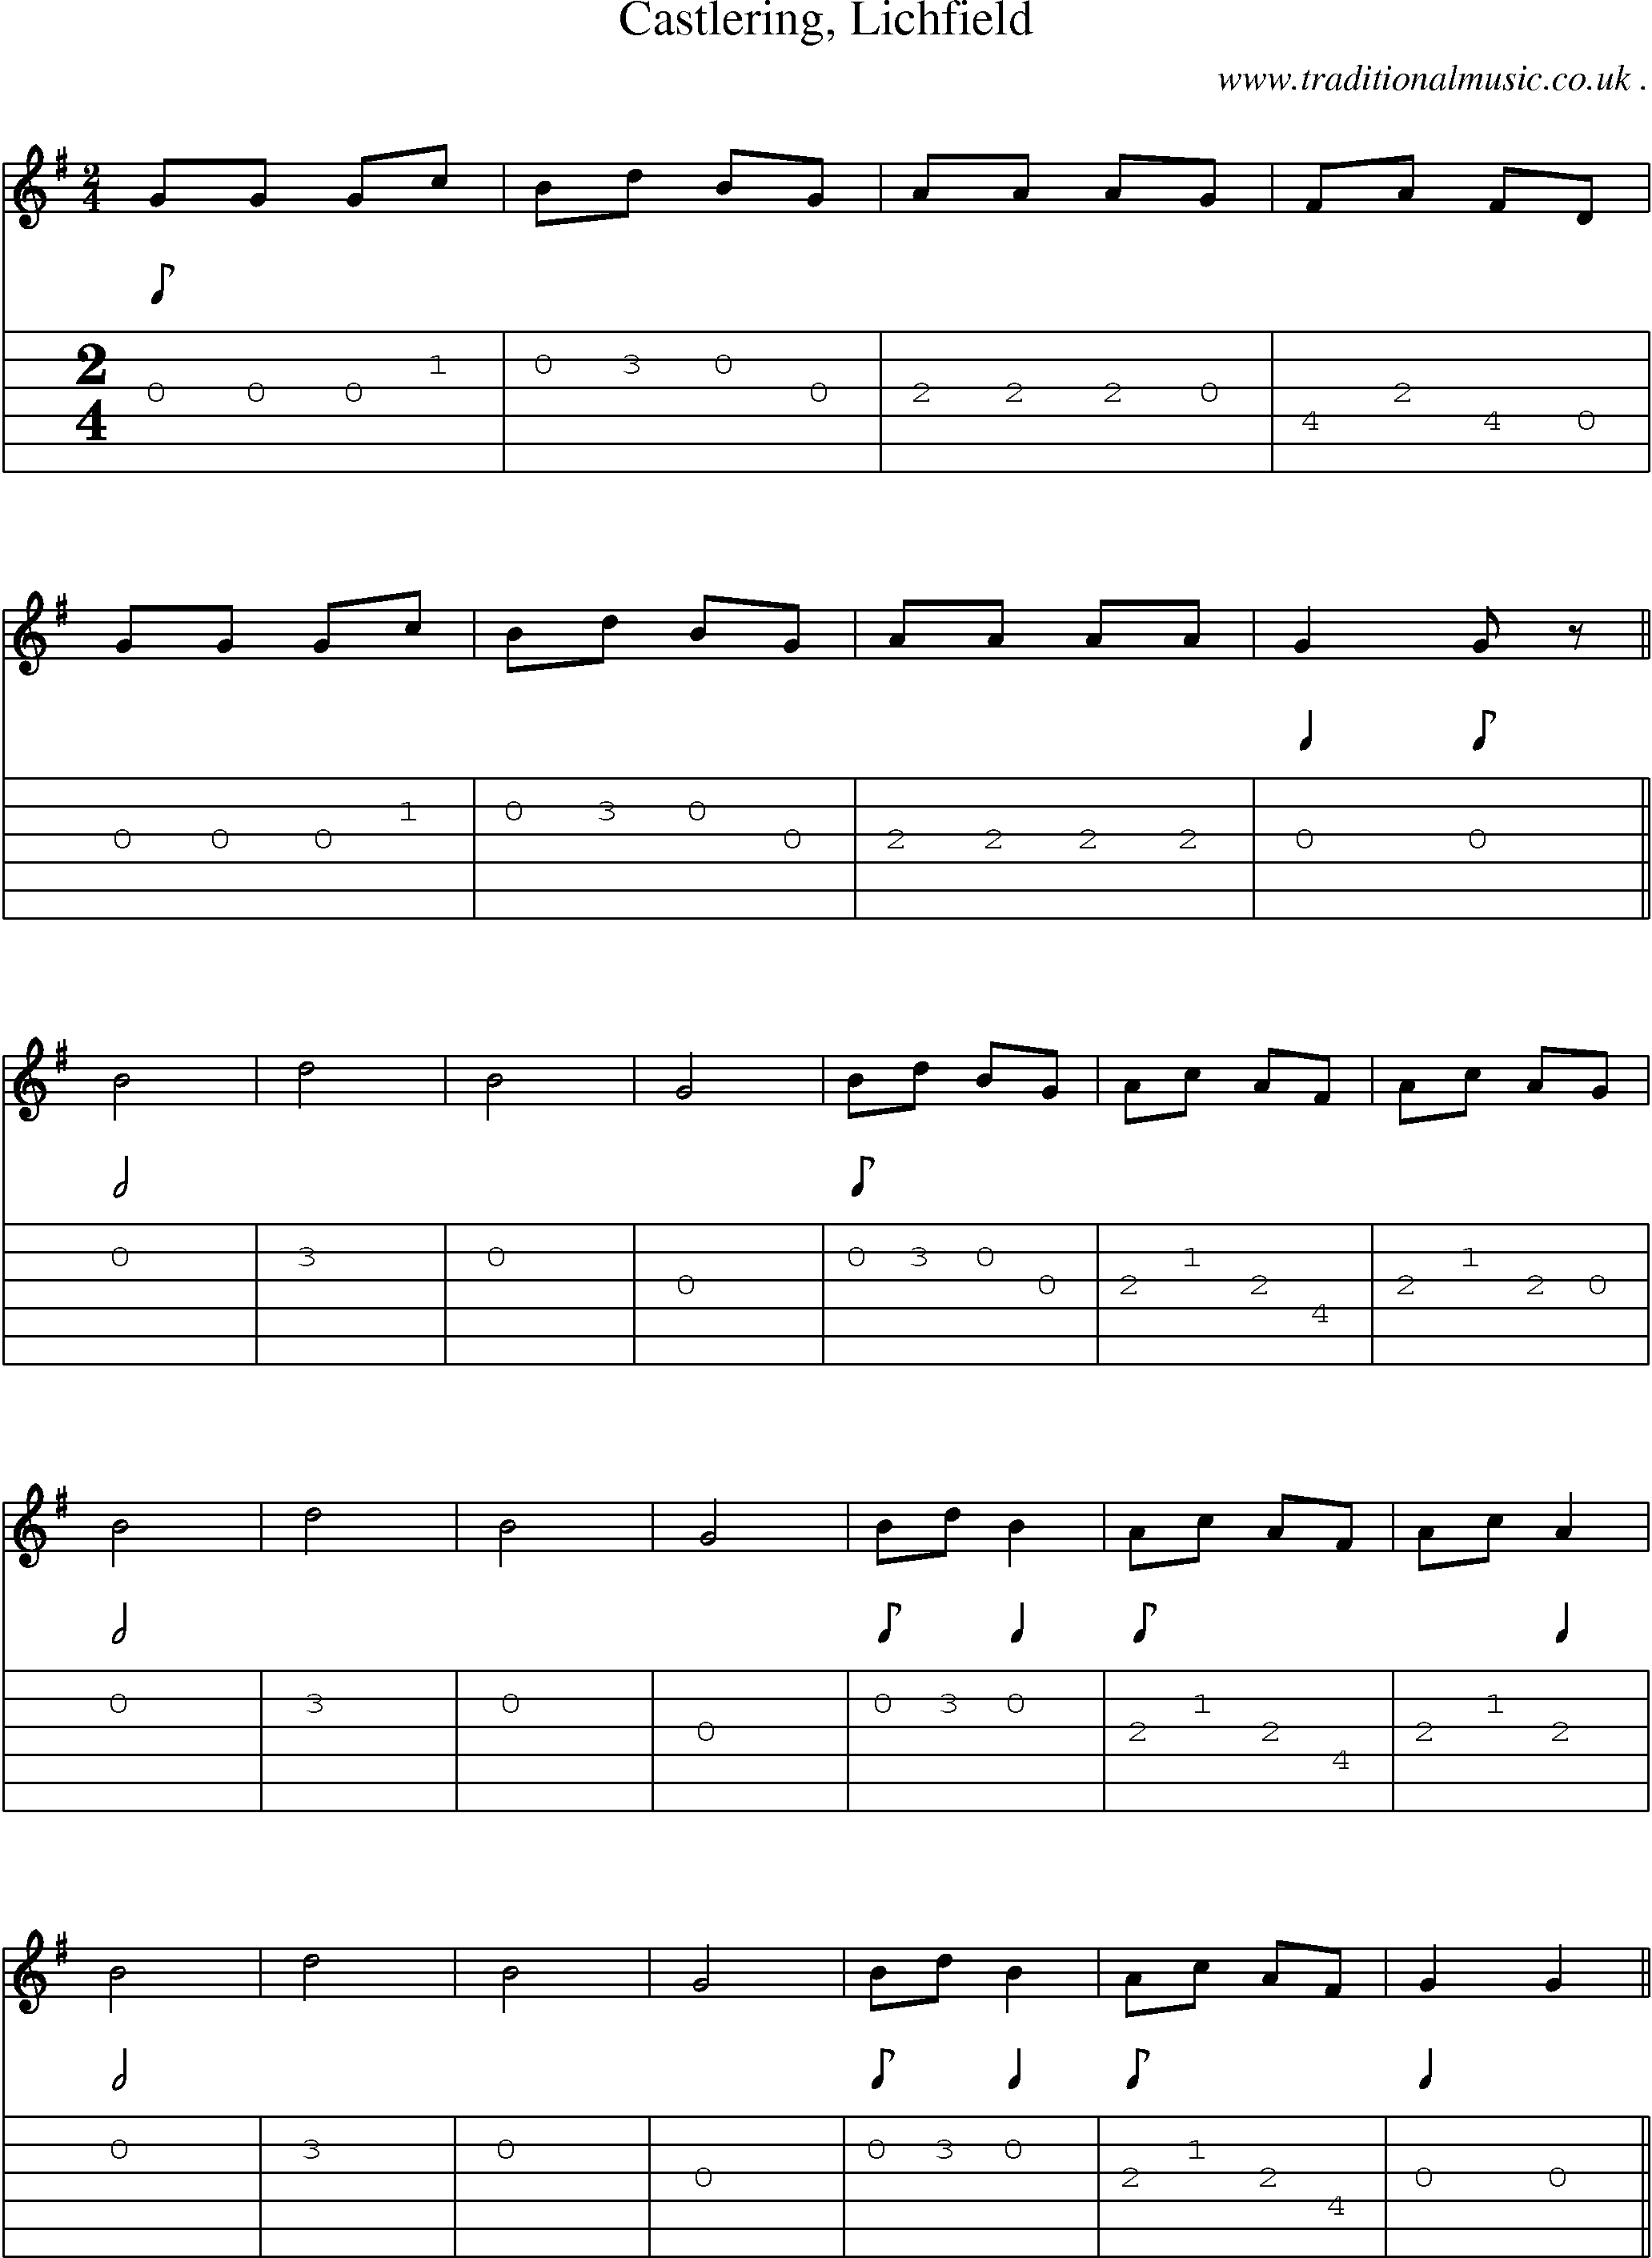 Sheet-Music and Guitar Tabs for Castlering Lichfield